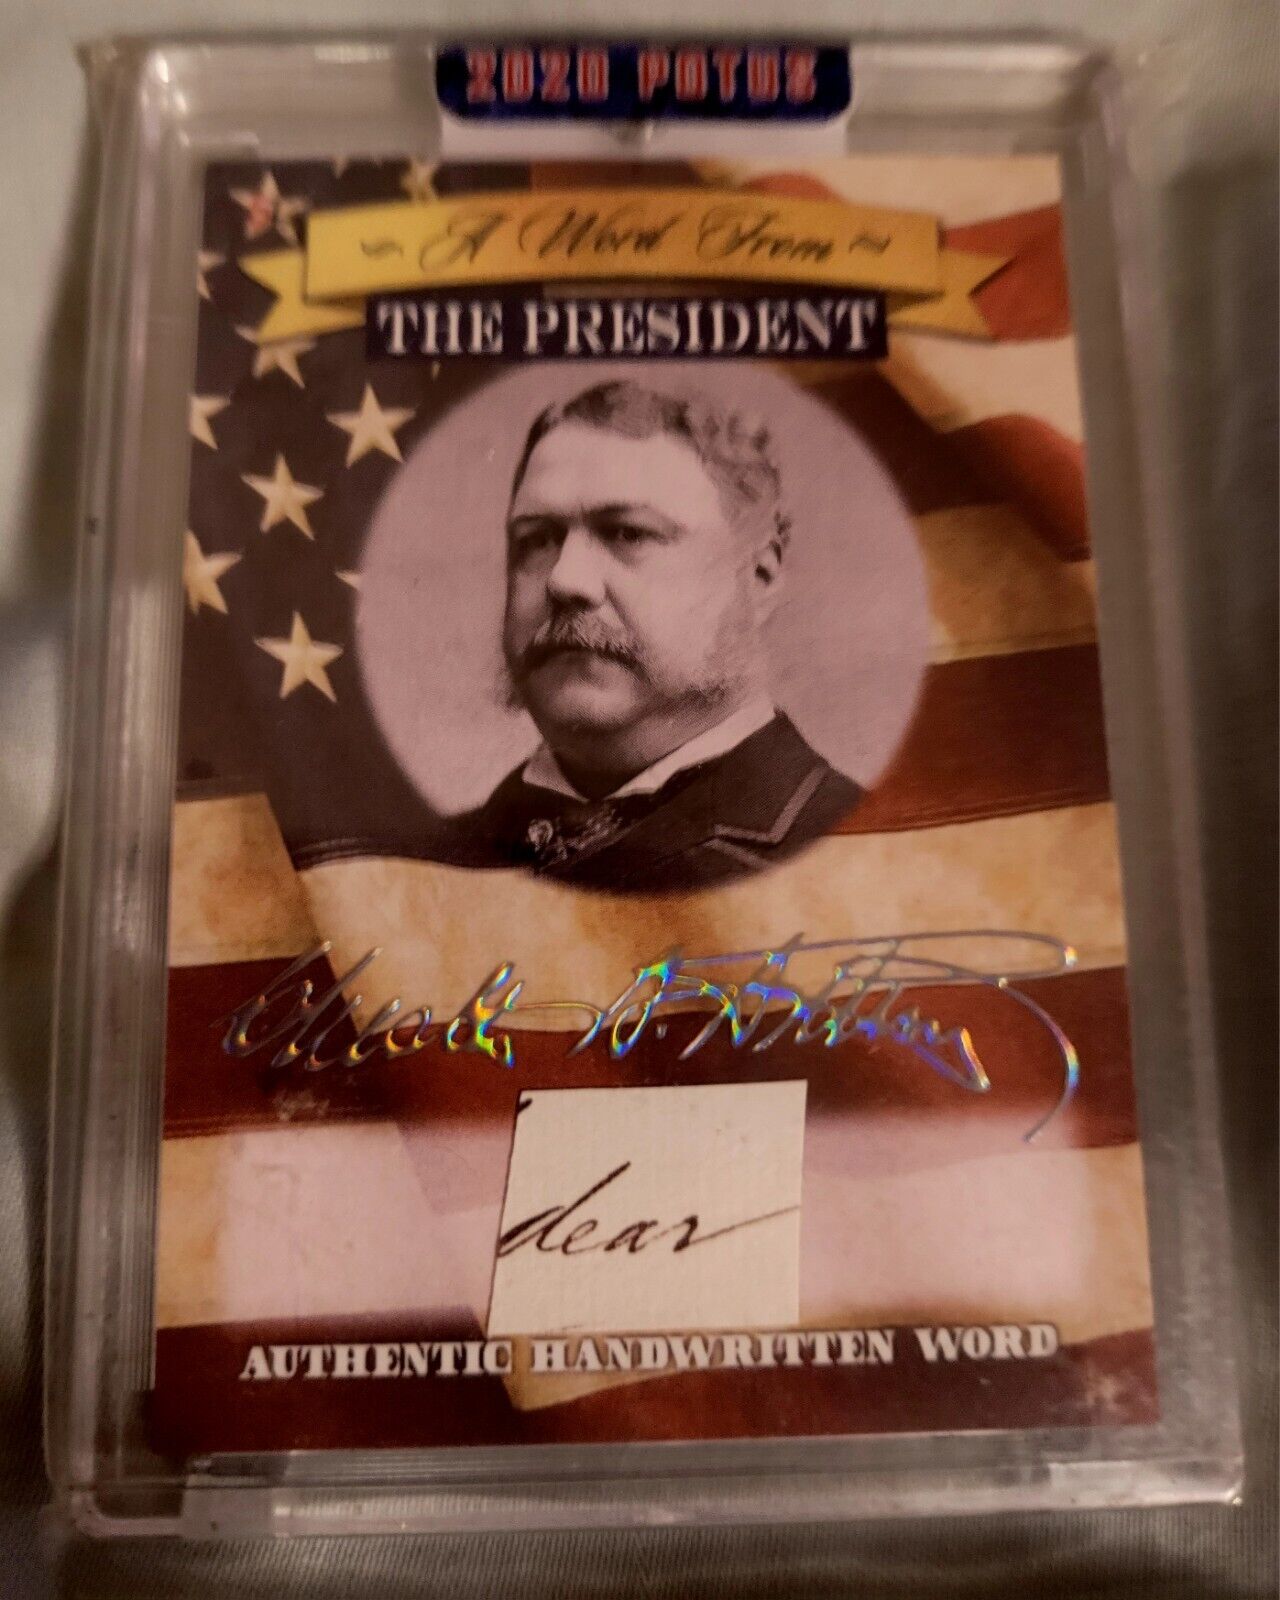 2020 POTUS WORD FROM THE PRESIDENT *CHESTER A ARTHUR* AUTHENTIC HANDWRITTEN WORD